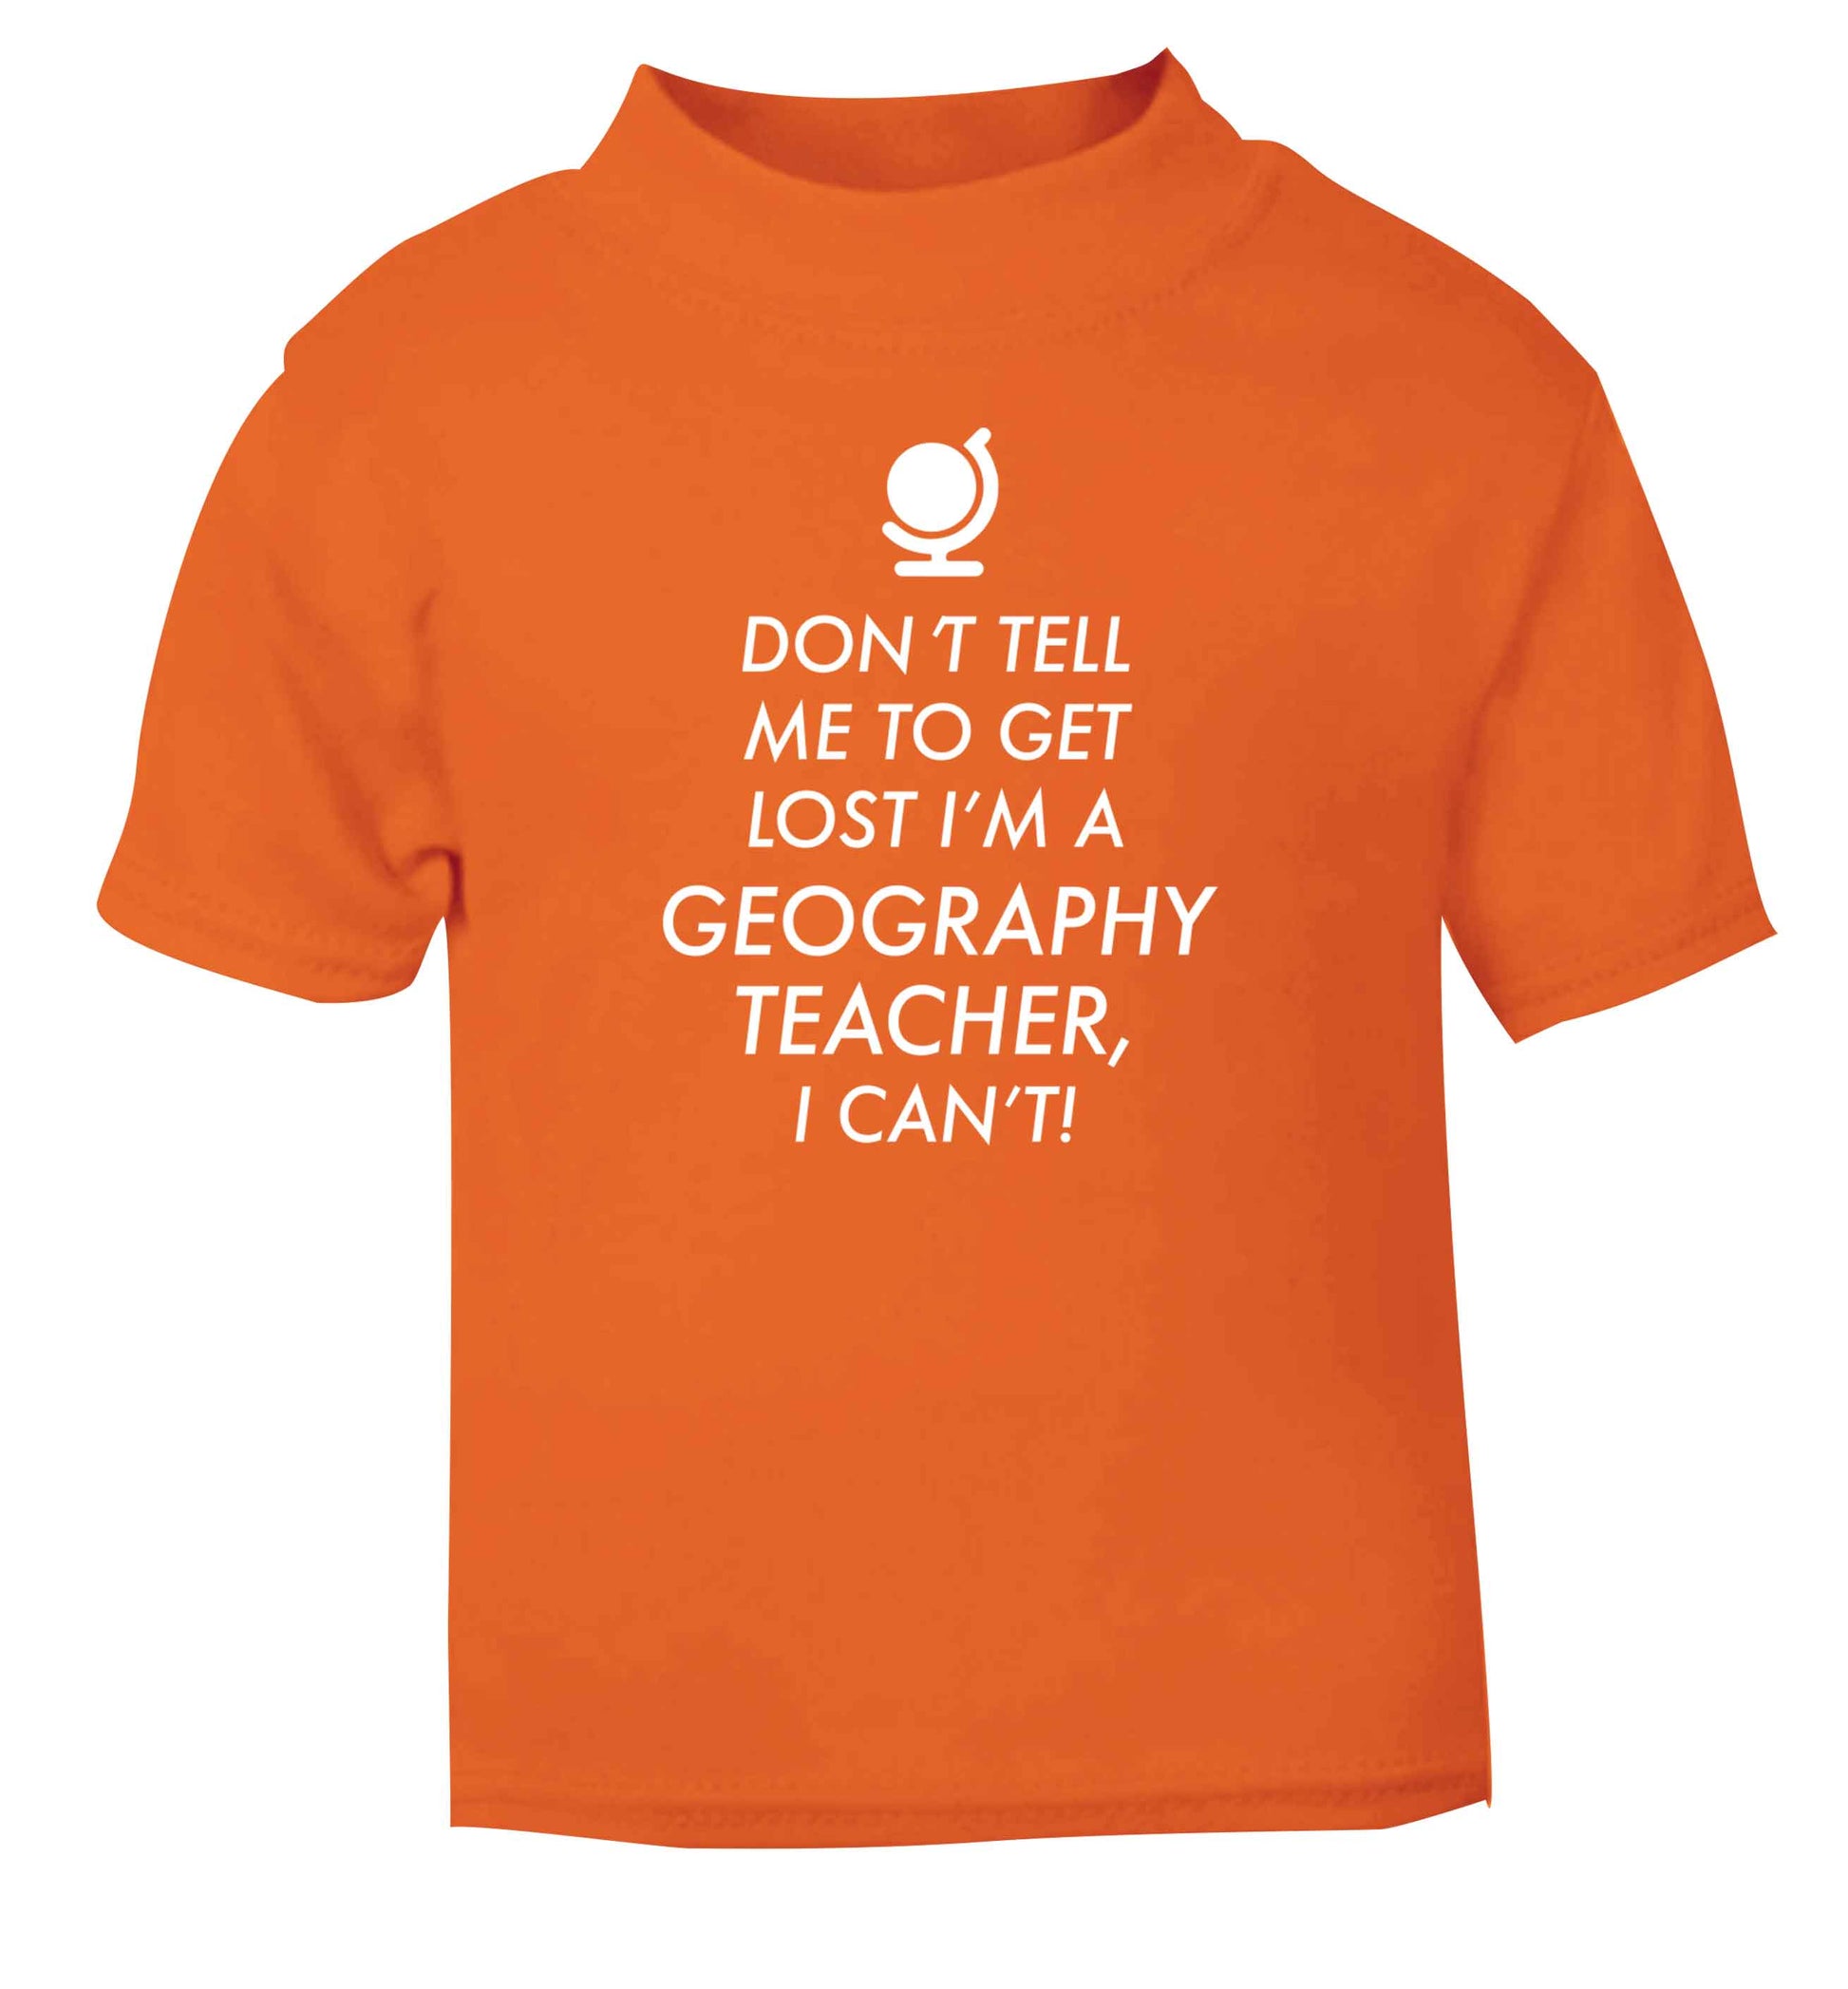 Don't tell me to get lost I'm a geography teacher, I can't orange Baby Toddler Tshirt 2 Years